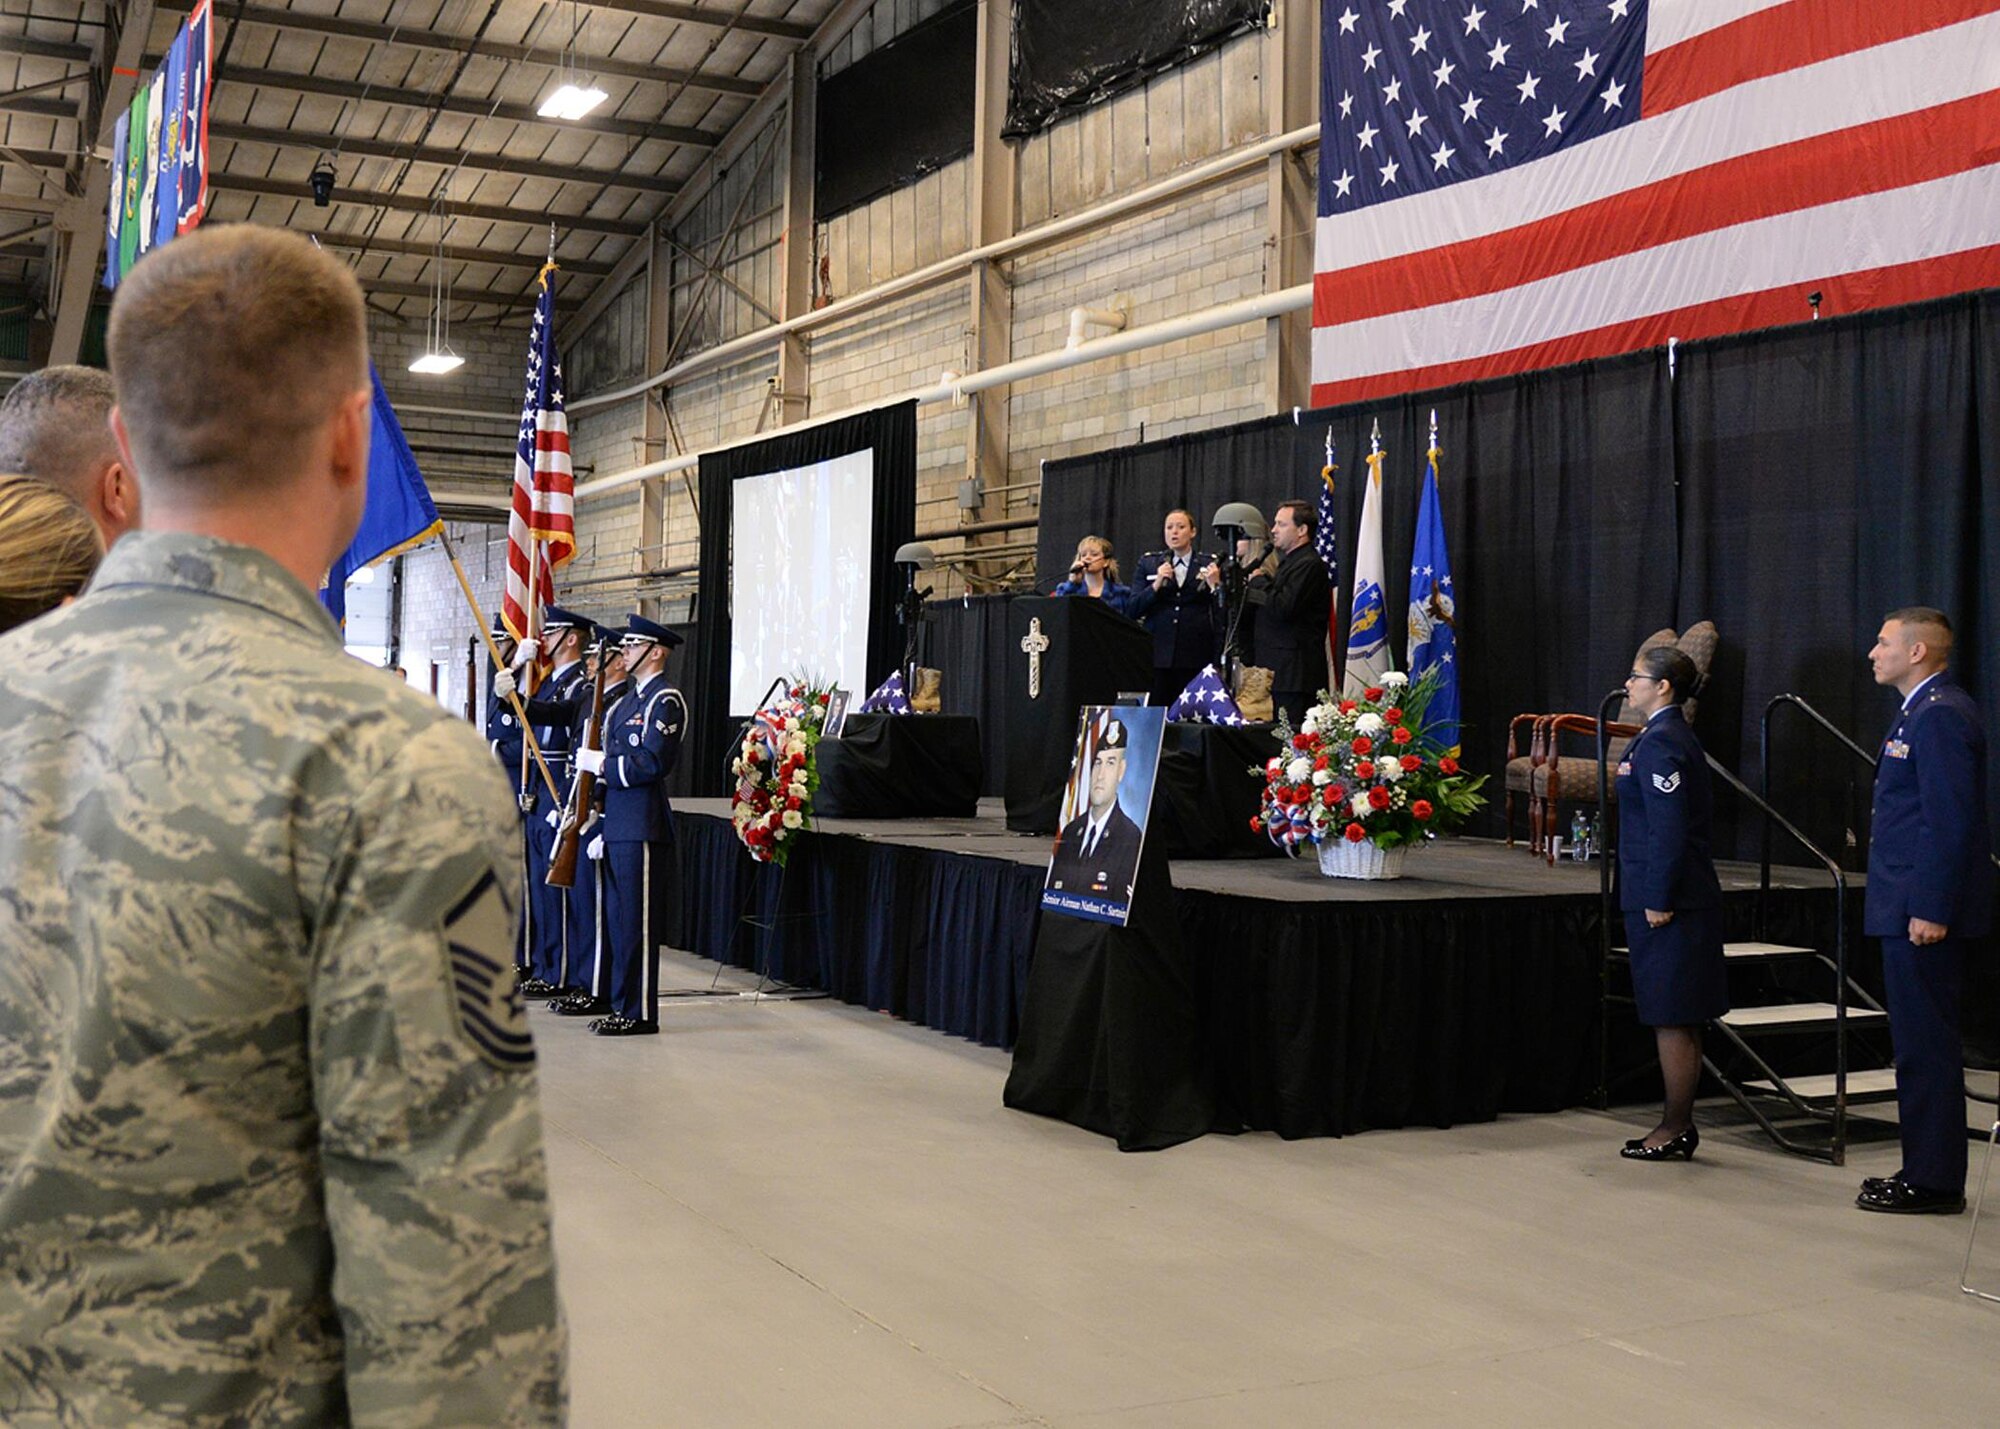 The Voices of Hanscom (from left) Michael Fields, Stacey Jones, Maj. Catherine Tobin and Andie Avram perform the National Anthem on stage during a memorial service at the Aero Club Hangar at Hanscom Air Force Base, Mass., Oct. 16. The service was held to honor Senior Airman Nathan Sartain and Senior Airman Kcey Ruiz, who were killed Oct. 2, when the C-130J Super Hercules they were on crashed shortly after takeoff from Jalalabad, Afghanistan. (U.S. Air Force photo/Jerry Saslav)